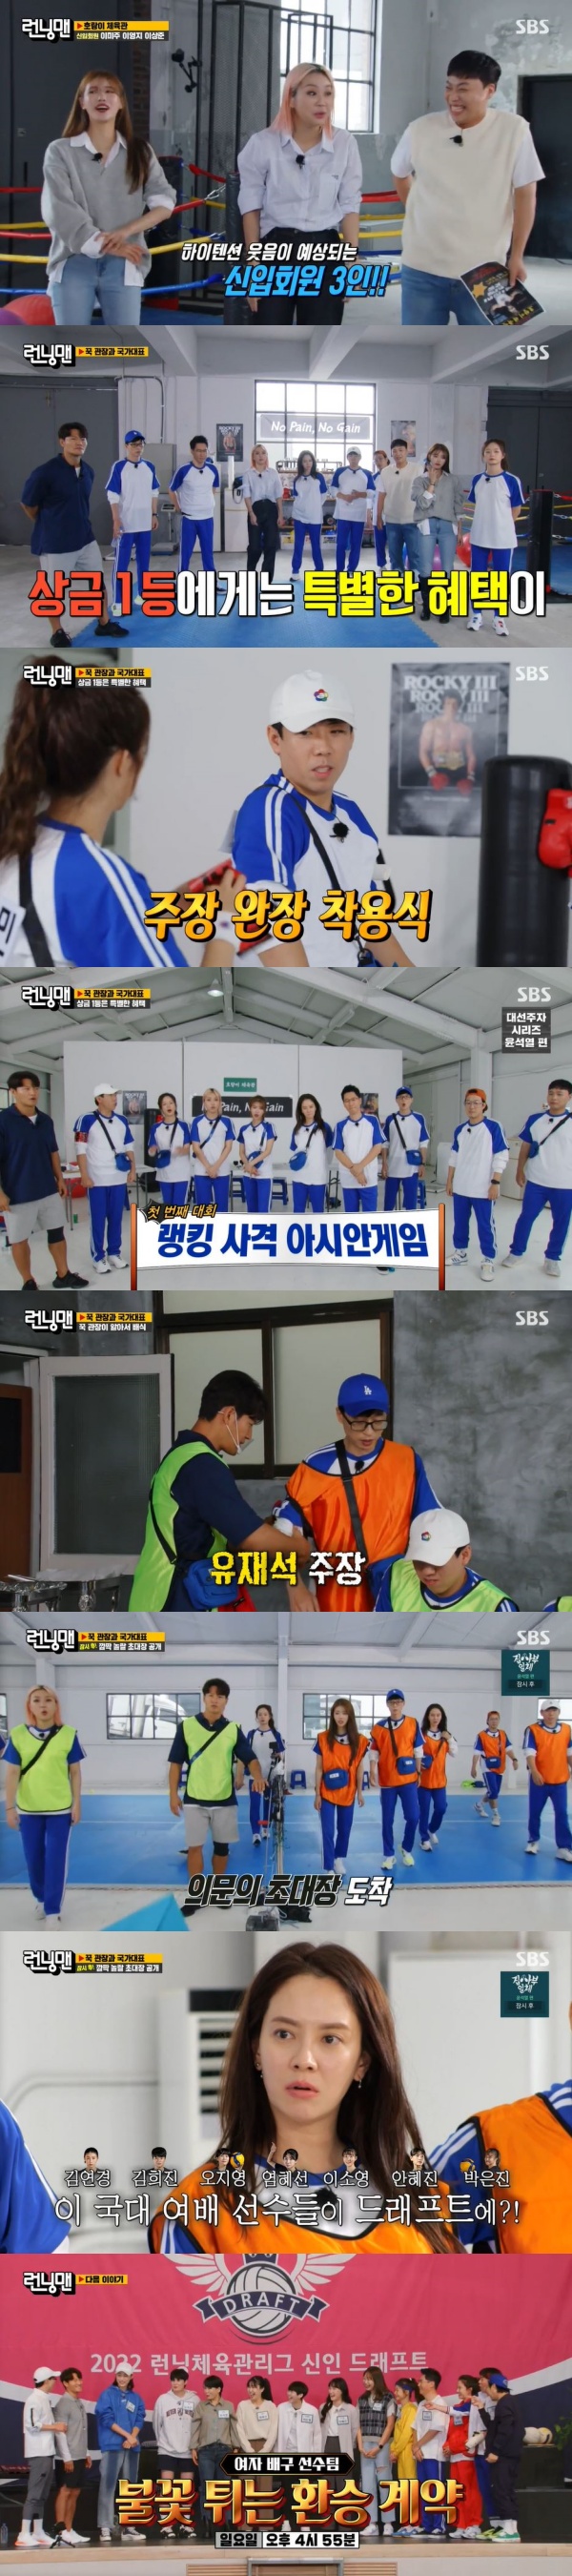 On SBS entertainment program Running Man, which aired on the 19th, the head of the Hung Kwan-jang Race, headed by Kim Jong-kook, was broadcast.Lee Mi-joo, Lee Young-ji and This level joined the national race with the head of the hunk.Lee Mi-joo started the situation drama, saying, I was preparing for idols and I turned to a comedy because I had nothing to do.Yoo Jae-Suk reported that Jeon So-min is raising the Americas so that Jeon So-min and Lee Mi-joo responded with a squat match situation drama.Kim Jong-kook, who turned into an executive director, held a claim election to become his right-hand man.Yoo Jae-Suk, who was a candidate, laughed at the promise that he would not talk about Yoon Eun-hye in the future.My dads job is a physical education teacher, said Lee Mi-joo, who was in the captains election.I am bleeding from a gymnast, he said. I will donate blood. Kim Jong-kook tried to play the situation.When Kim Jong-kook, who received the American situation drama, saw that Jeon So-min was nervous, It took me four years (the last brother) to get the situation drama.Yang Se-chan and Song Ji-hyo, who won the first round mission, and Jeon So-min and Lee Young-ji paid dues.Kim Jong-kook, who learned about the payment of dues, was disappointed.Kim Jong-kook laughed at Yang Se-chan, saying, What is the claim?Claim Yang Se-chan was stripped of Kim Jong-kooks food-tasting claim; Yoo Jae-Suk, who was chosen as the new captain, won the public sentiment by sharing the prize money.But he quipped, I will walk the dues with the alleged memorial.The members had a second mission showdown: the estate team Ji Suk-jin caused the anger of the estate team by successive mistakes.Eventually this level made a mistake at the end and the Americas won the first round.The Gnostic and American teams went into a second-round showdown; the Gnostic team avenged down by a mistake by the Gnostic team Kim Jong-kook.Kim Jong-kook, who was the director, laughed as he appeared to be enthralling. The members of the Americas team who won the second mission secured 200,000 One prize money each.The production team gave Kim Jong-kook an invitation to question: The identity of the invitation was recruiting 2021 female rookie draft director.Kim Jong-kook announced, A new draft with Kim Yeon-kyung, Kim Hee-jin, Oh Ji-young, Yeom Hye-sun, Lee So-young, Ahn Hye-jin and Park Eun-jin will be held at Running Man.Meanwhile, Running Man is an entertainment program that Korean stars play games and missions together and give laughter. It broadcasts every Sunday at 5 p.m.Photo SBS broadcast screen capture